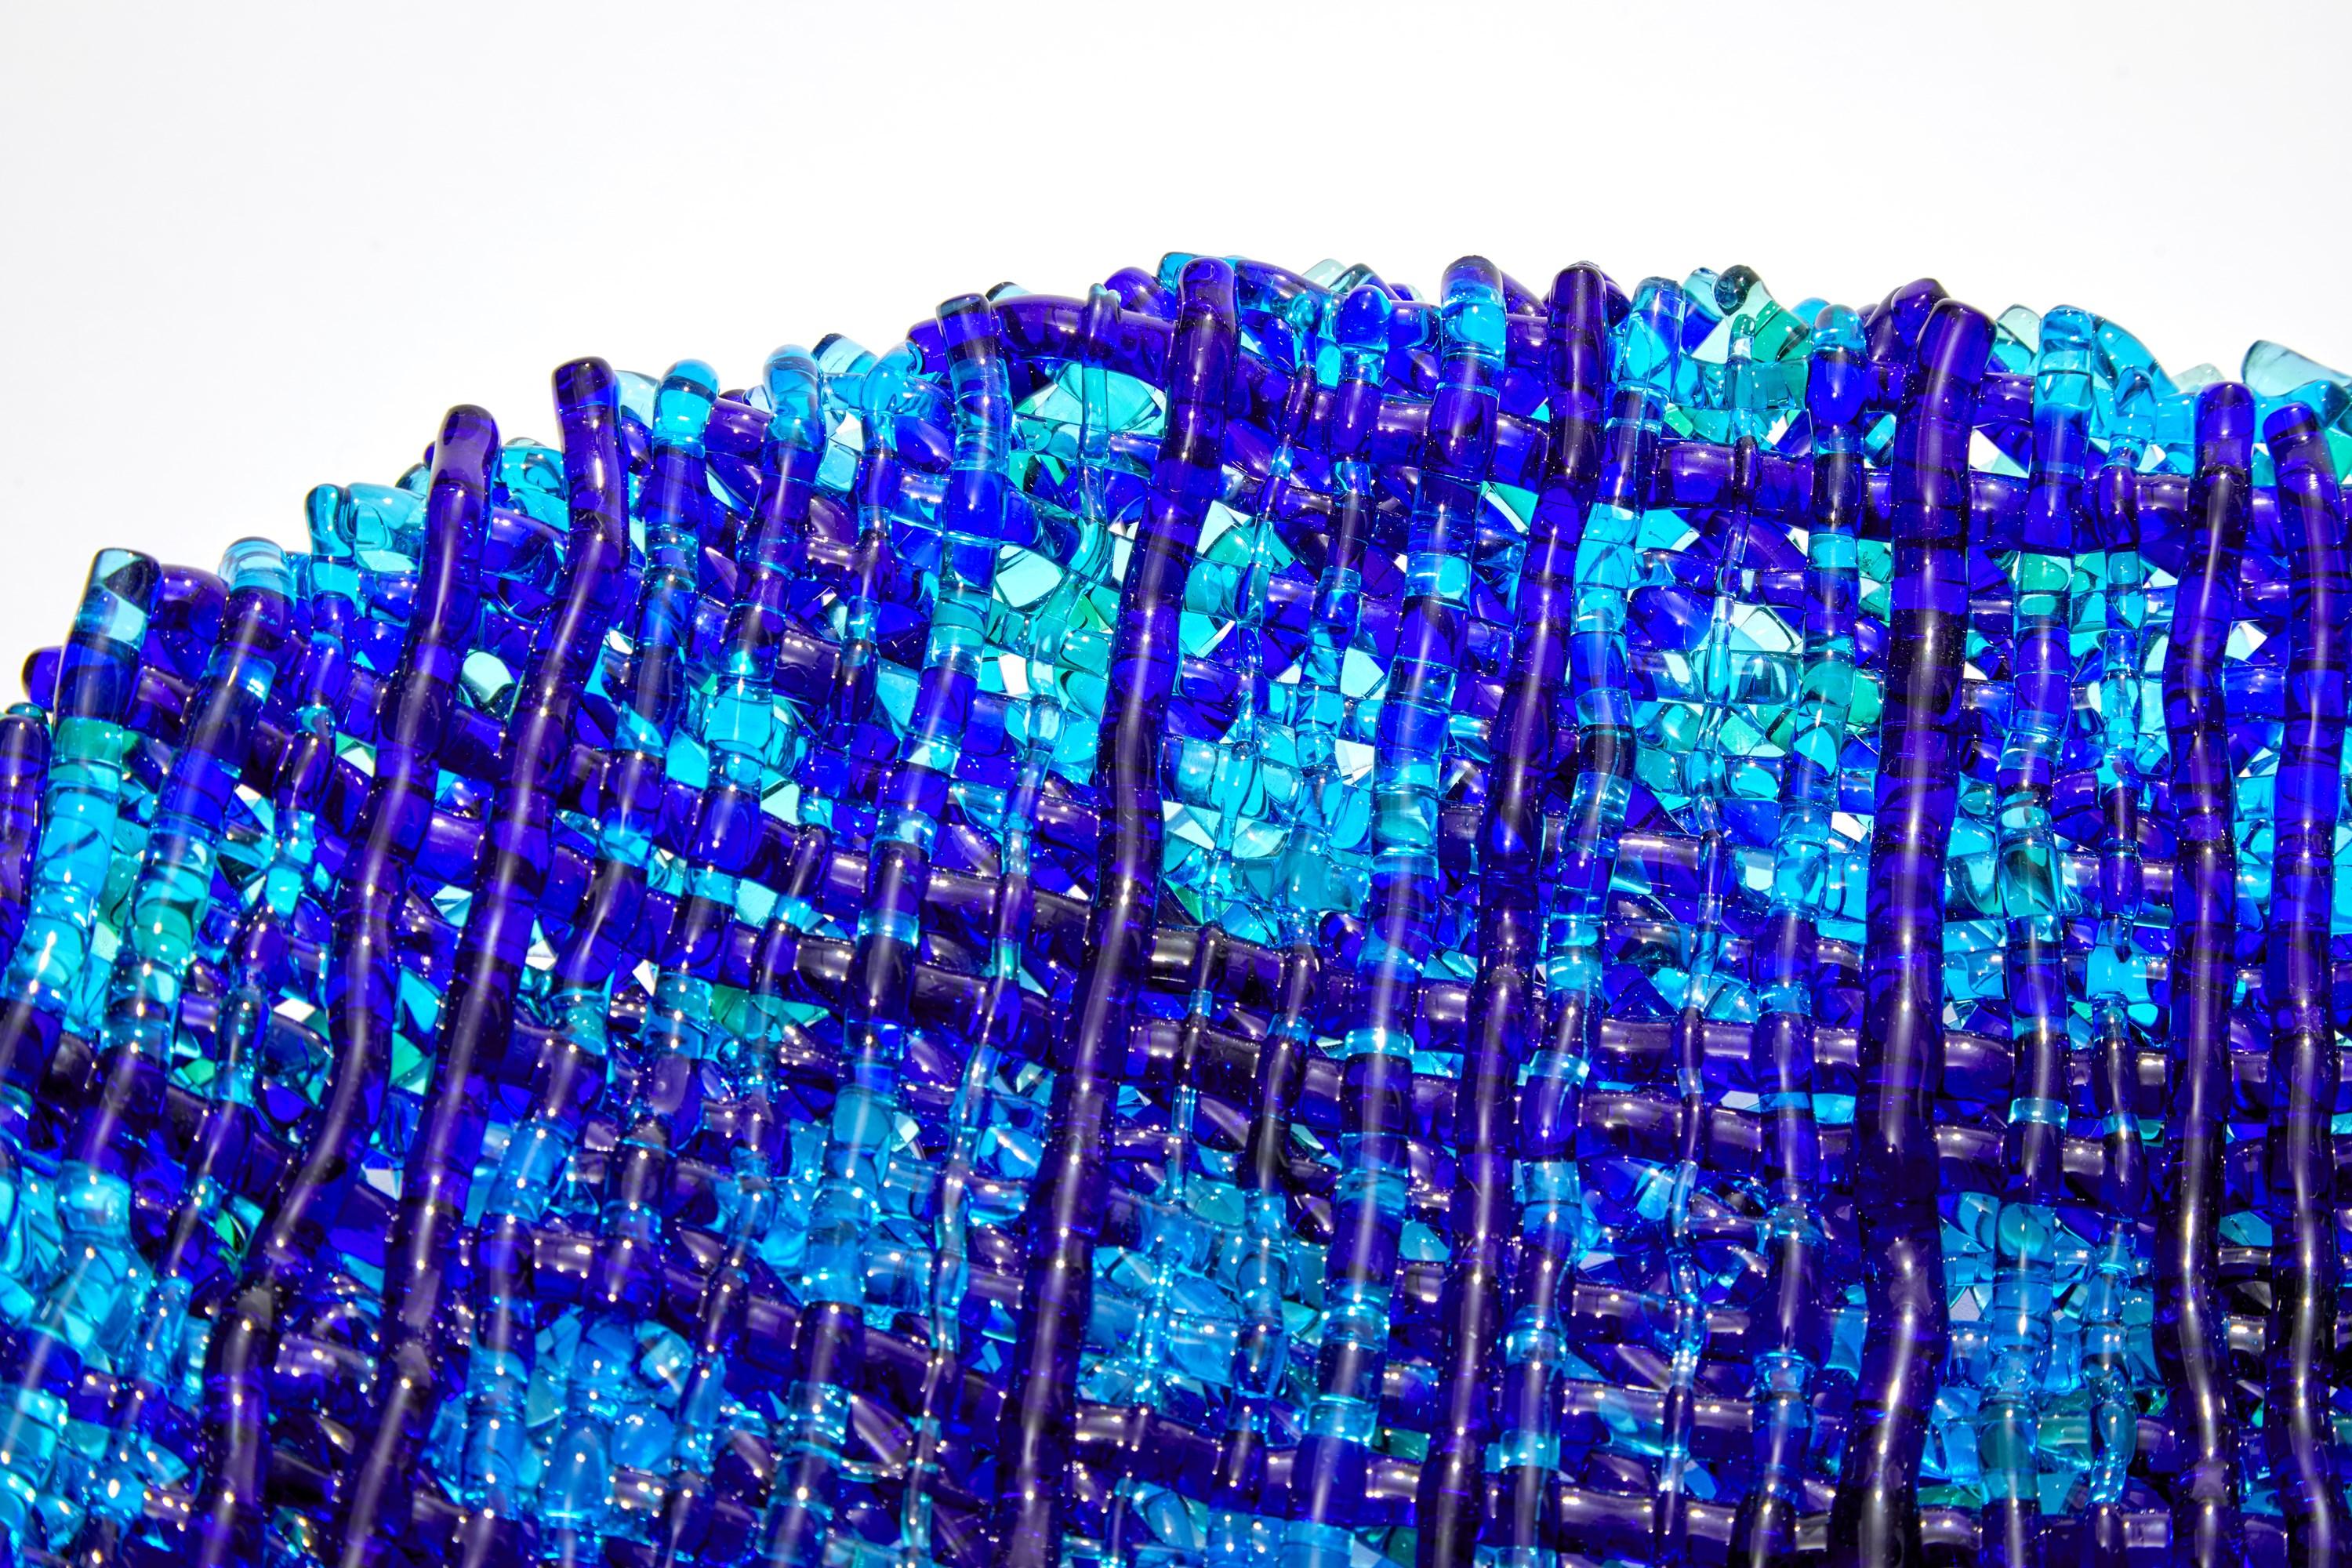 Hand-Crafted Blue Topography, a Woven Glass Sculptural Centrepiece by Cathryn Shilling